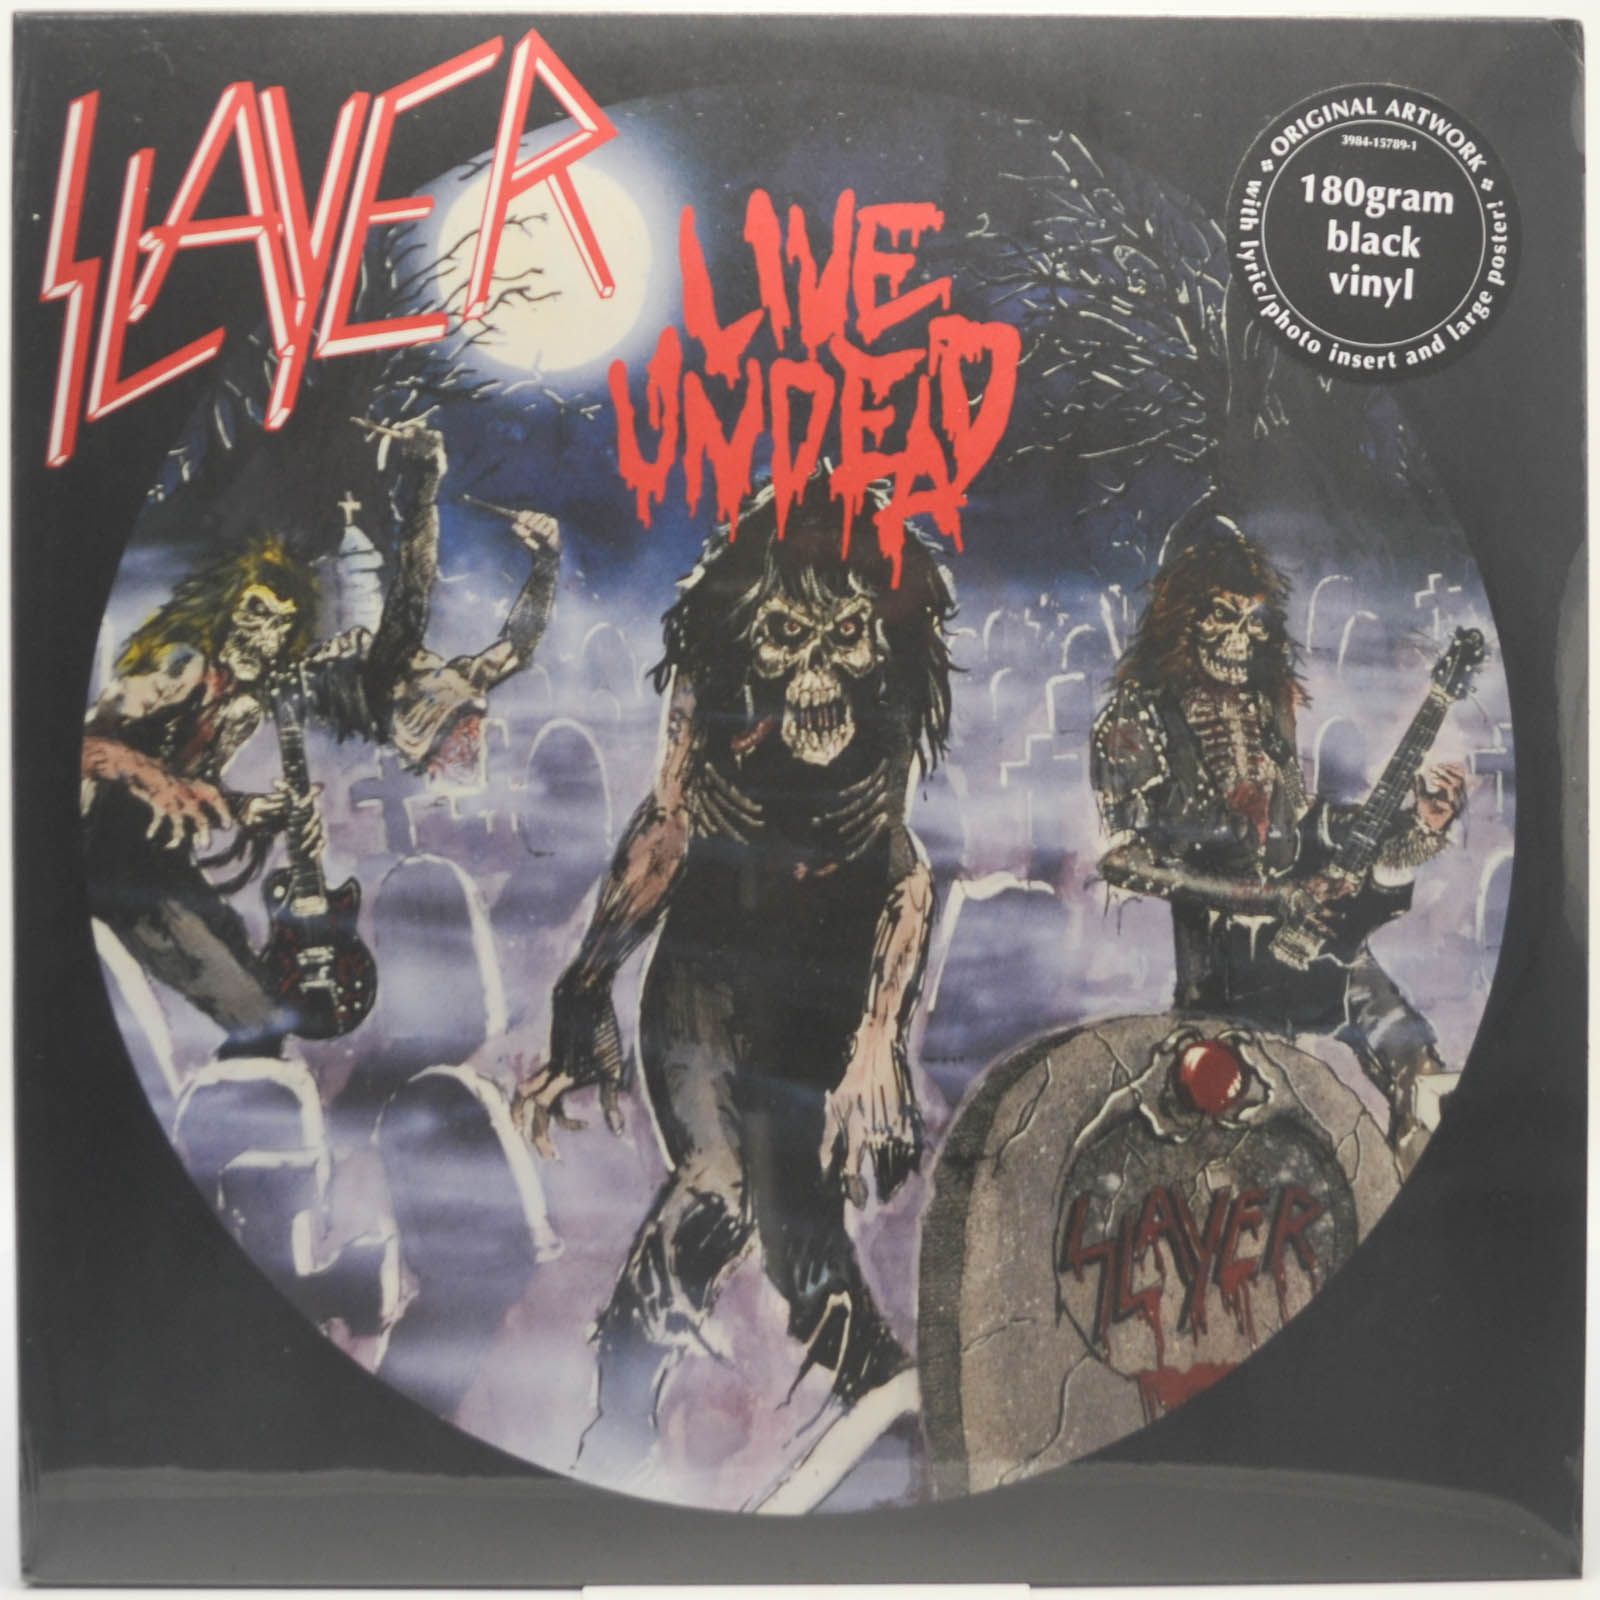 Live Undead, 1985